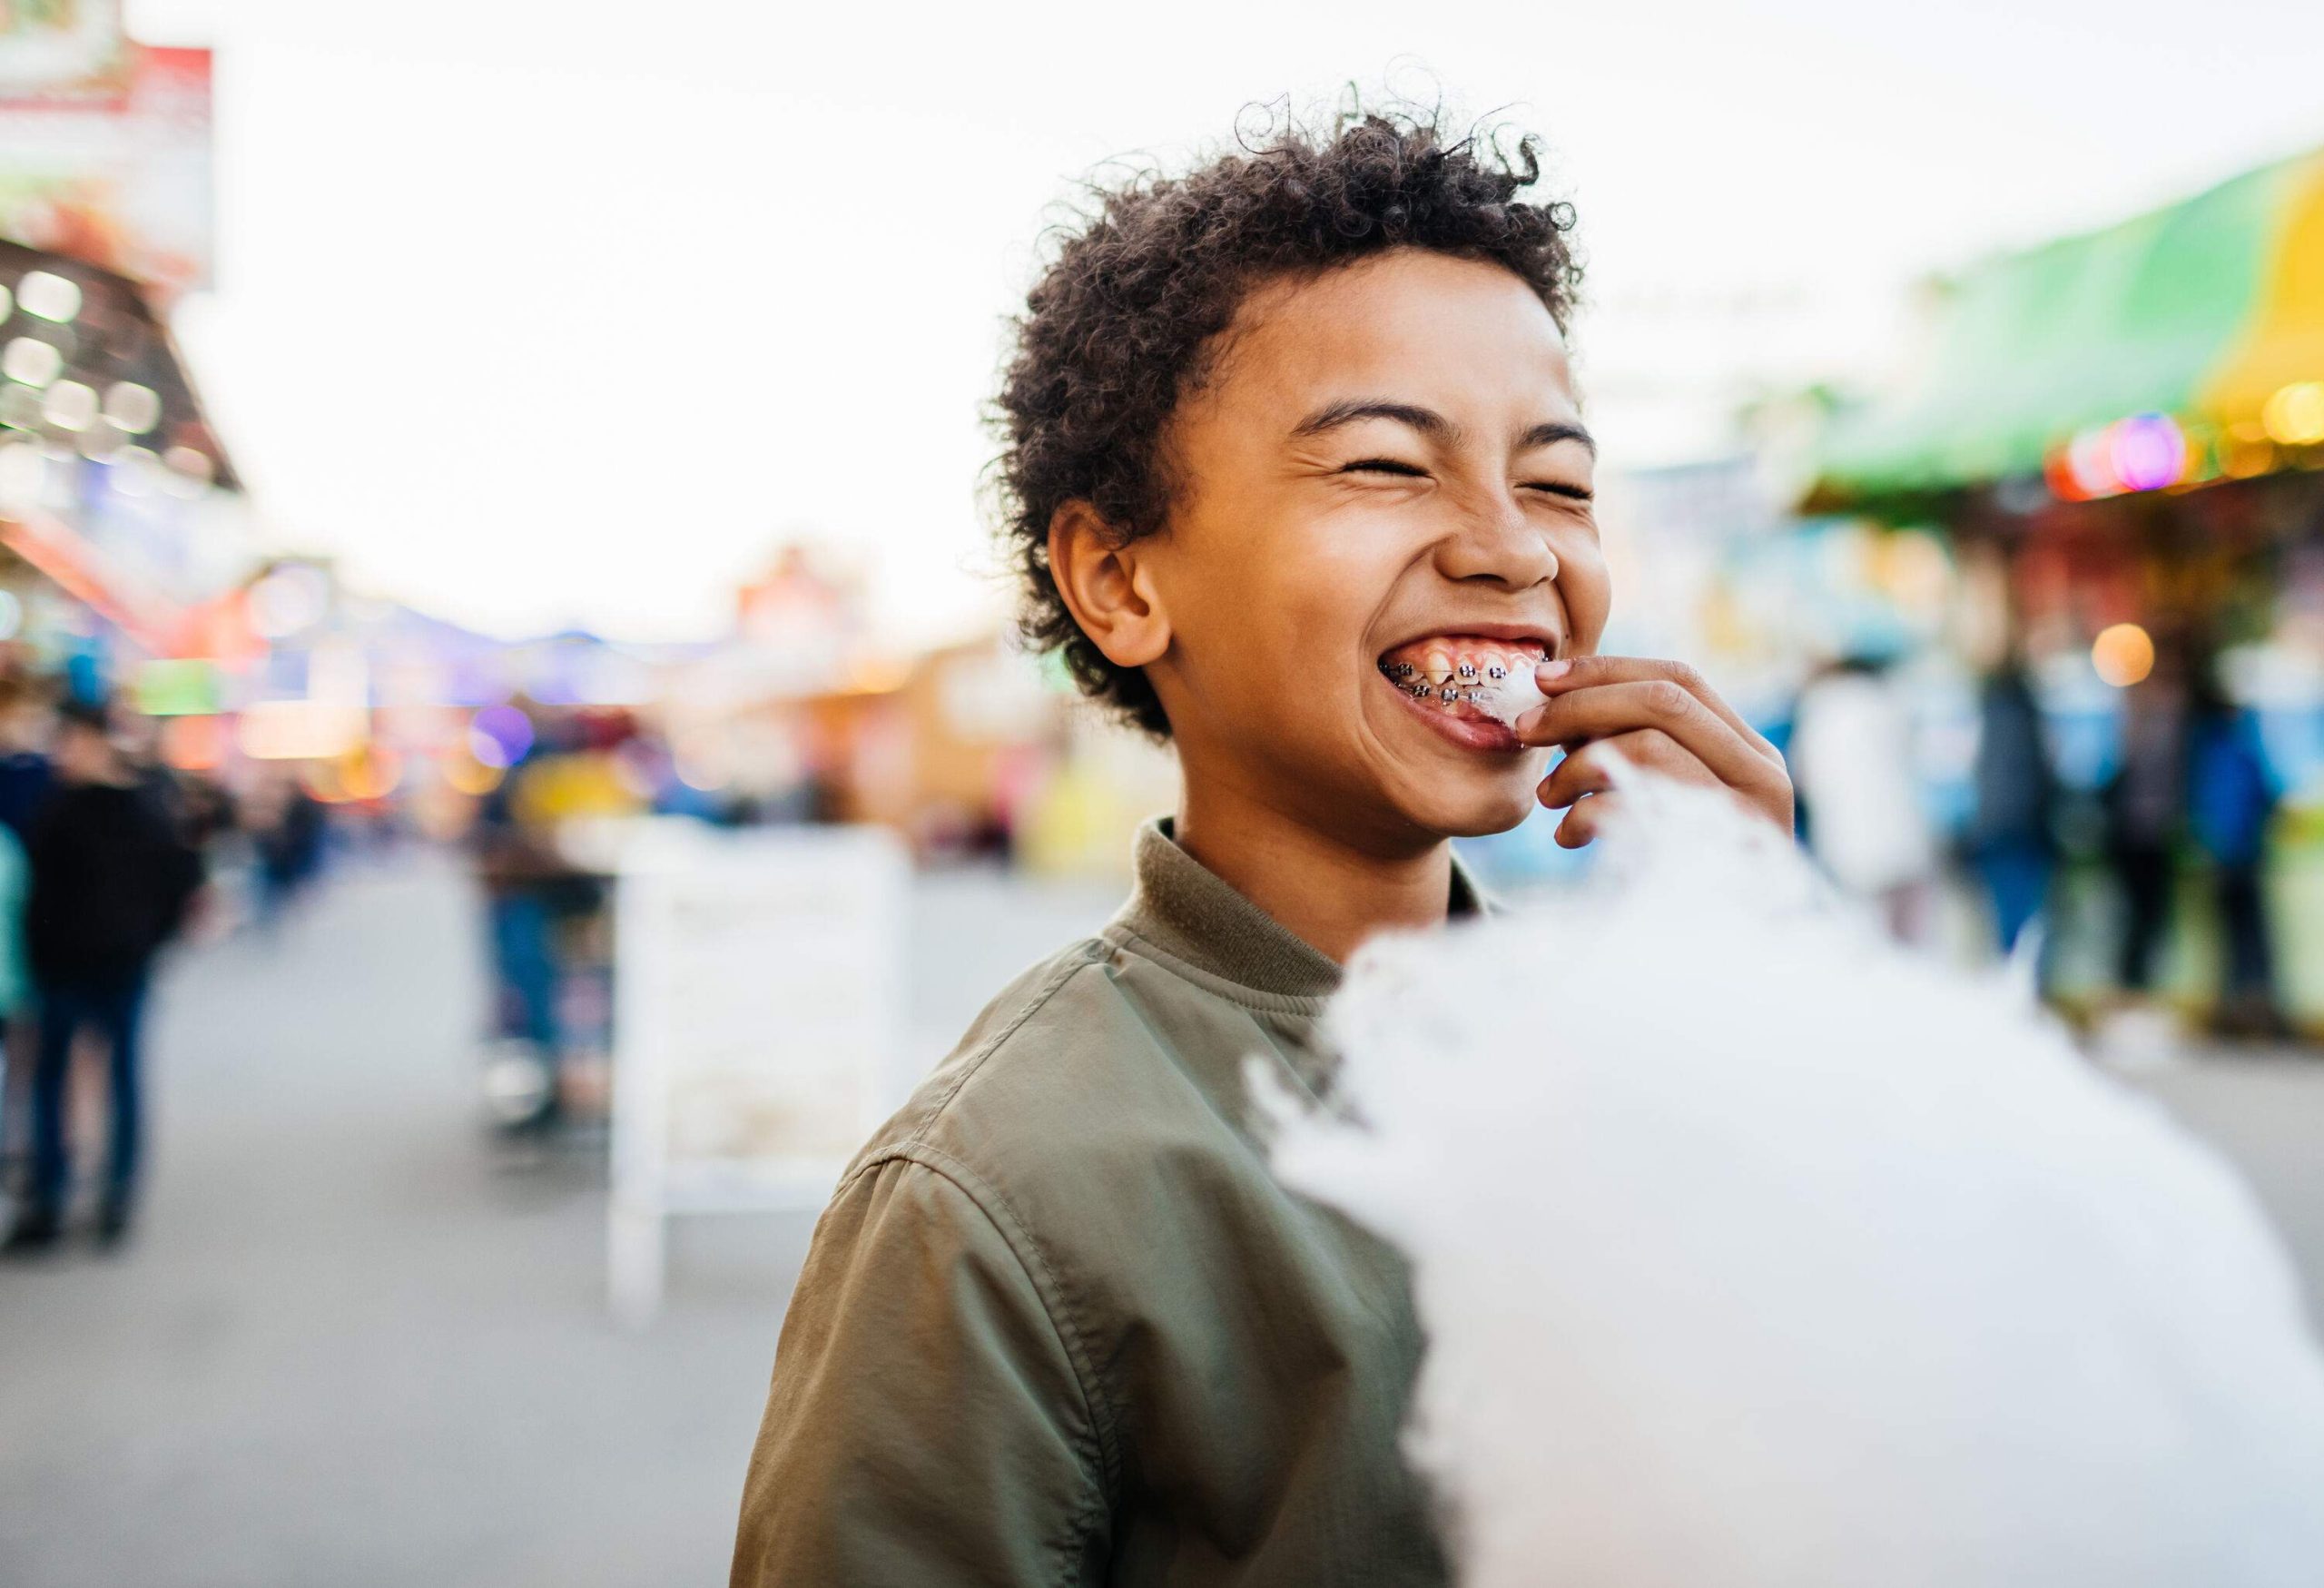 A curly-haired kid with braces eats a piece of cotton candy.